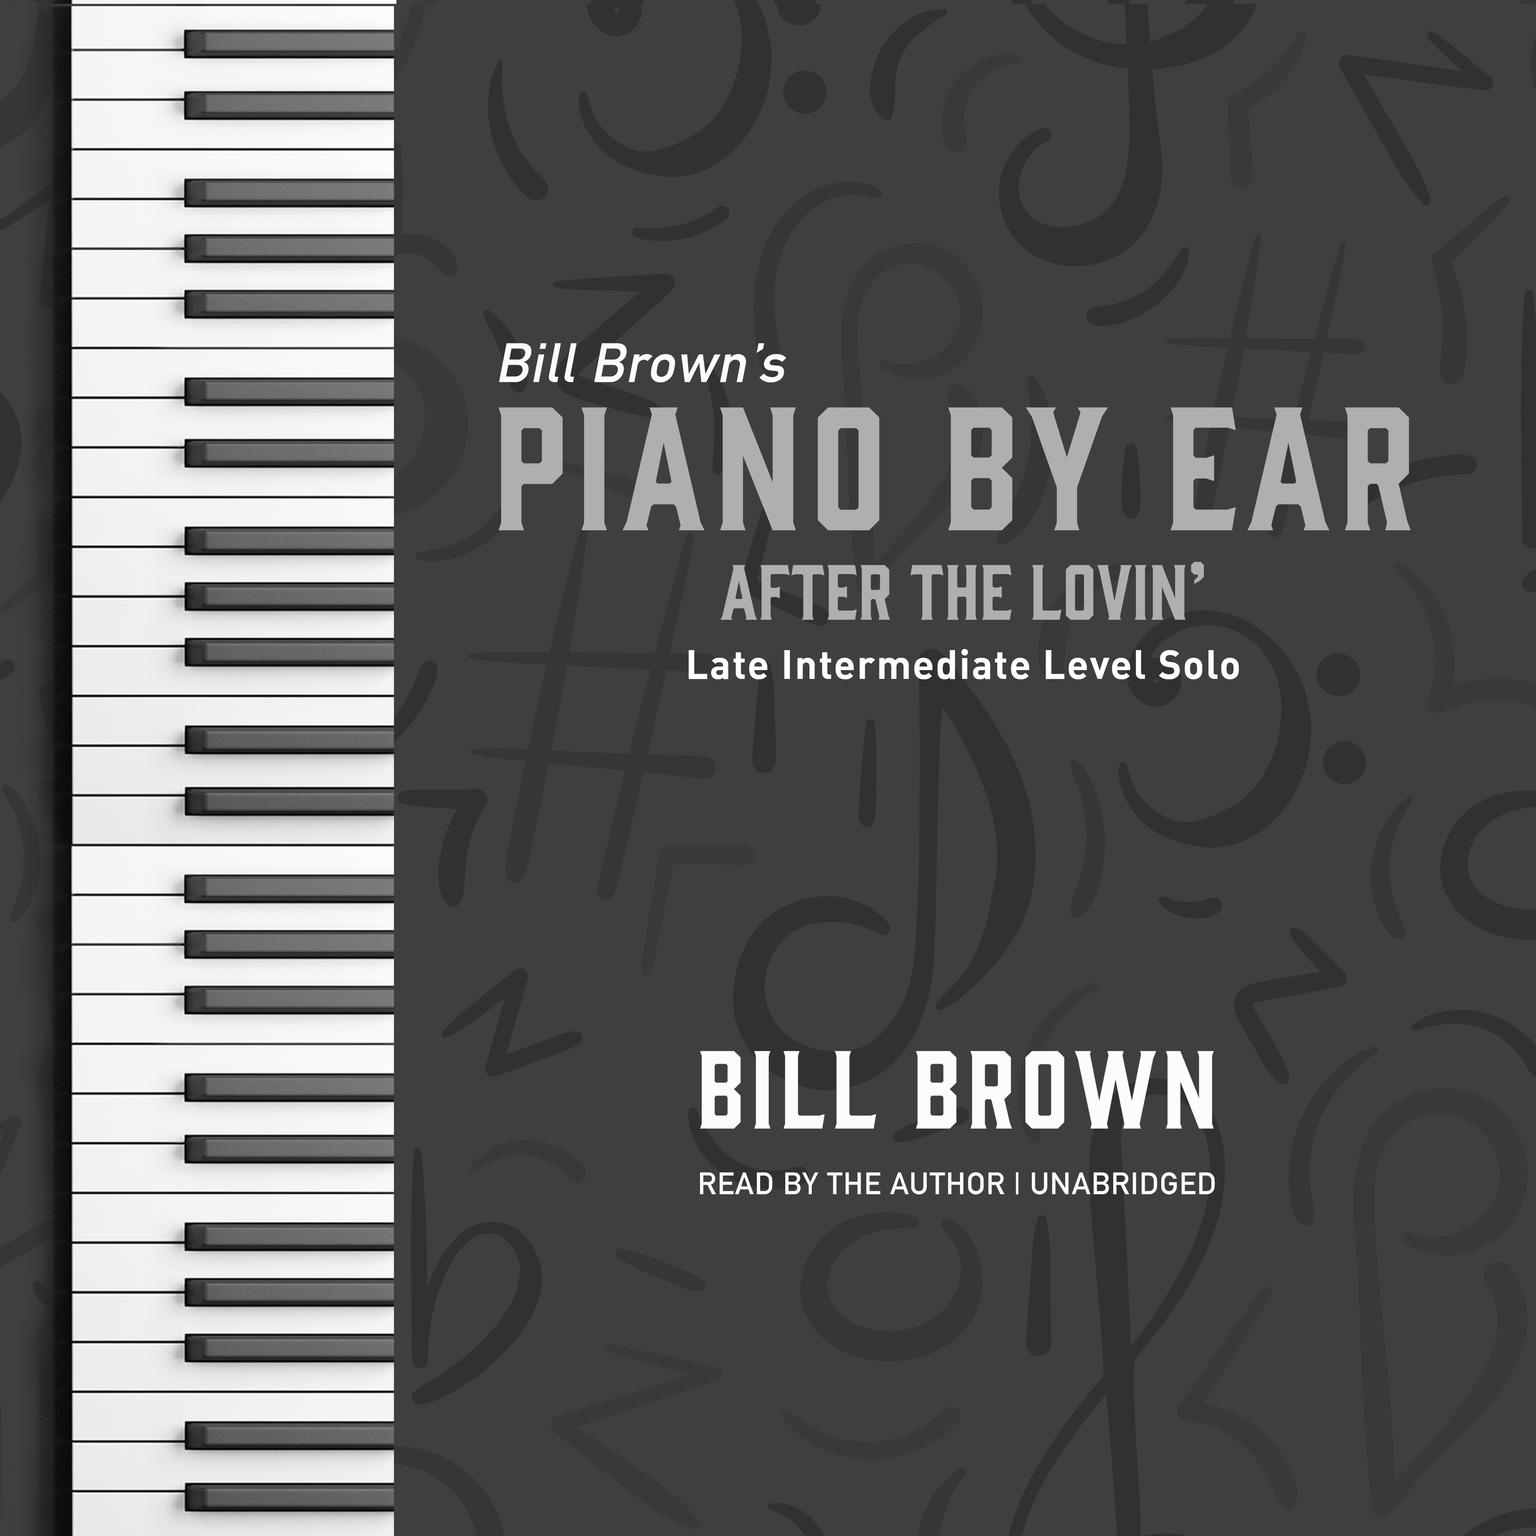 After the Lovin: Late Intermediate Level Solo Audiobook, by Bill Brown